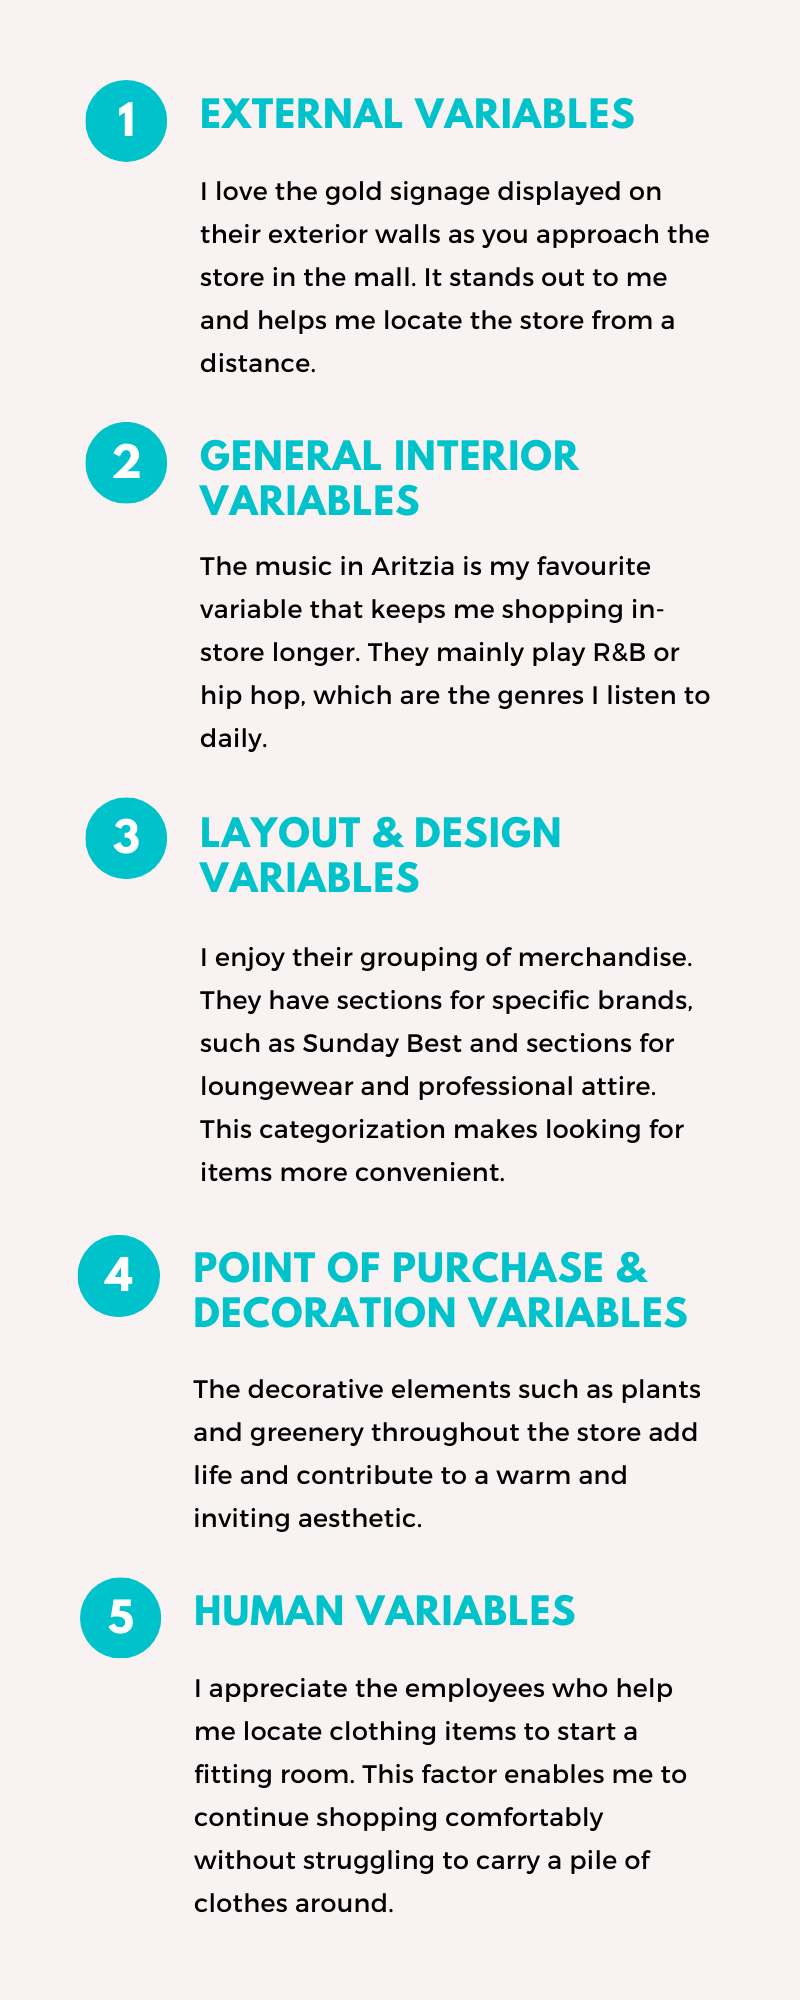 Infographic depicting the key variables that influence retail shopping experiences such as the external variables, the internal variables, the layout, design, and point of purchase decoration.